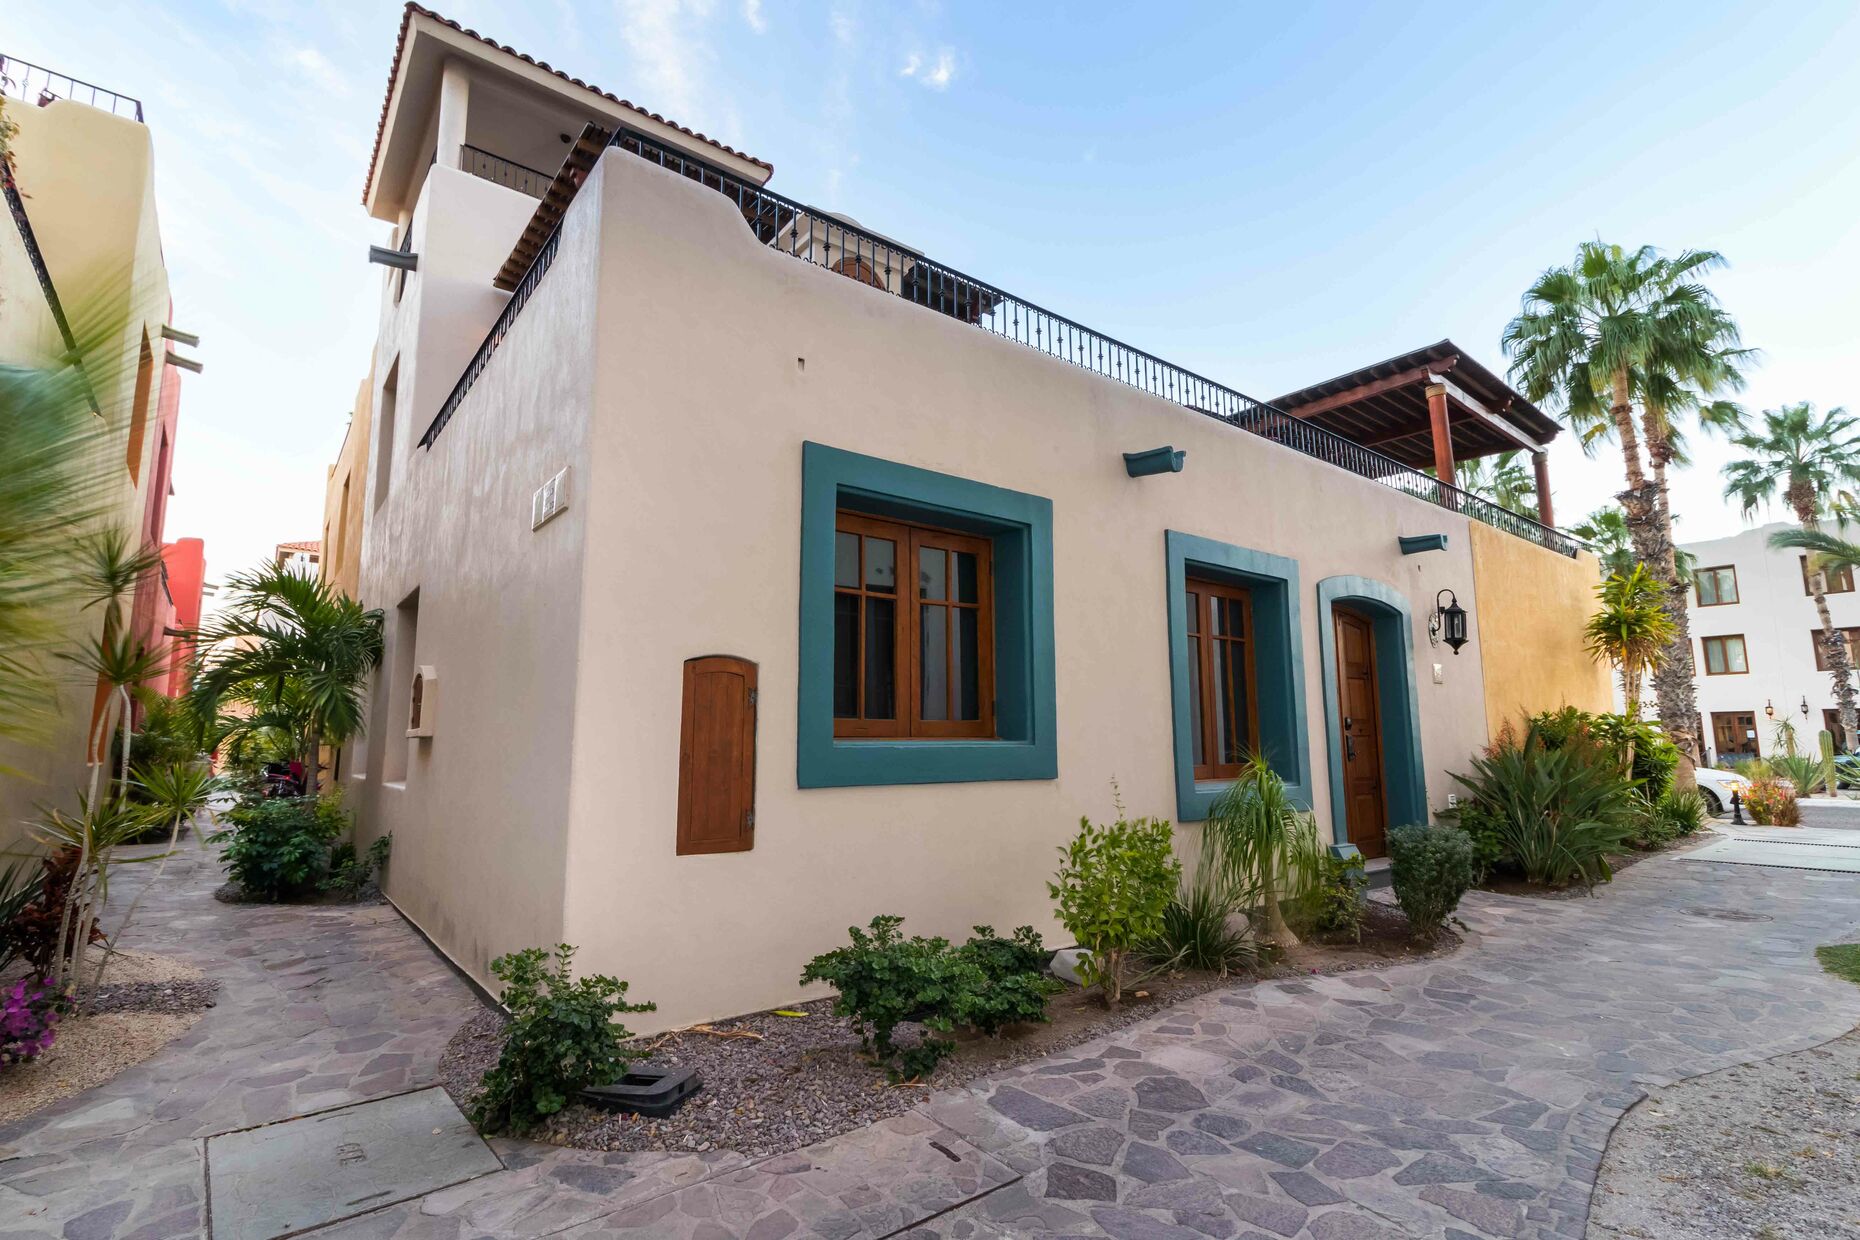 Casa Corazon /  2 BR & 2 BA home in Loreto Bay, Steps from Coffee shop and Store